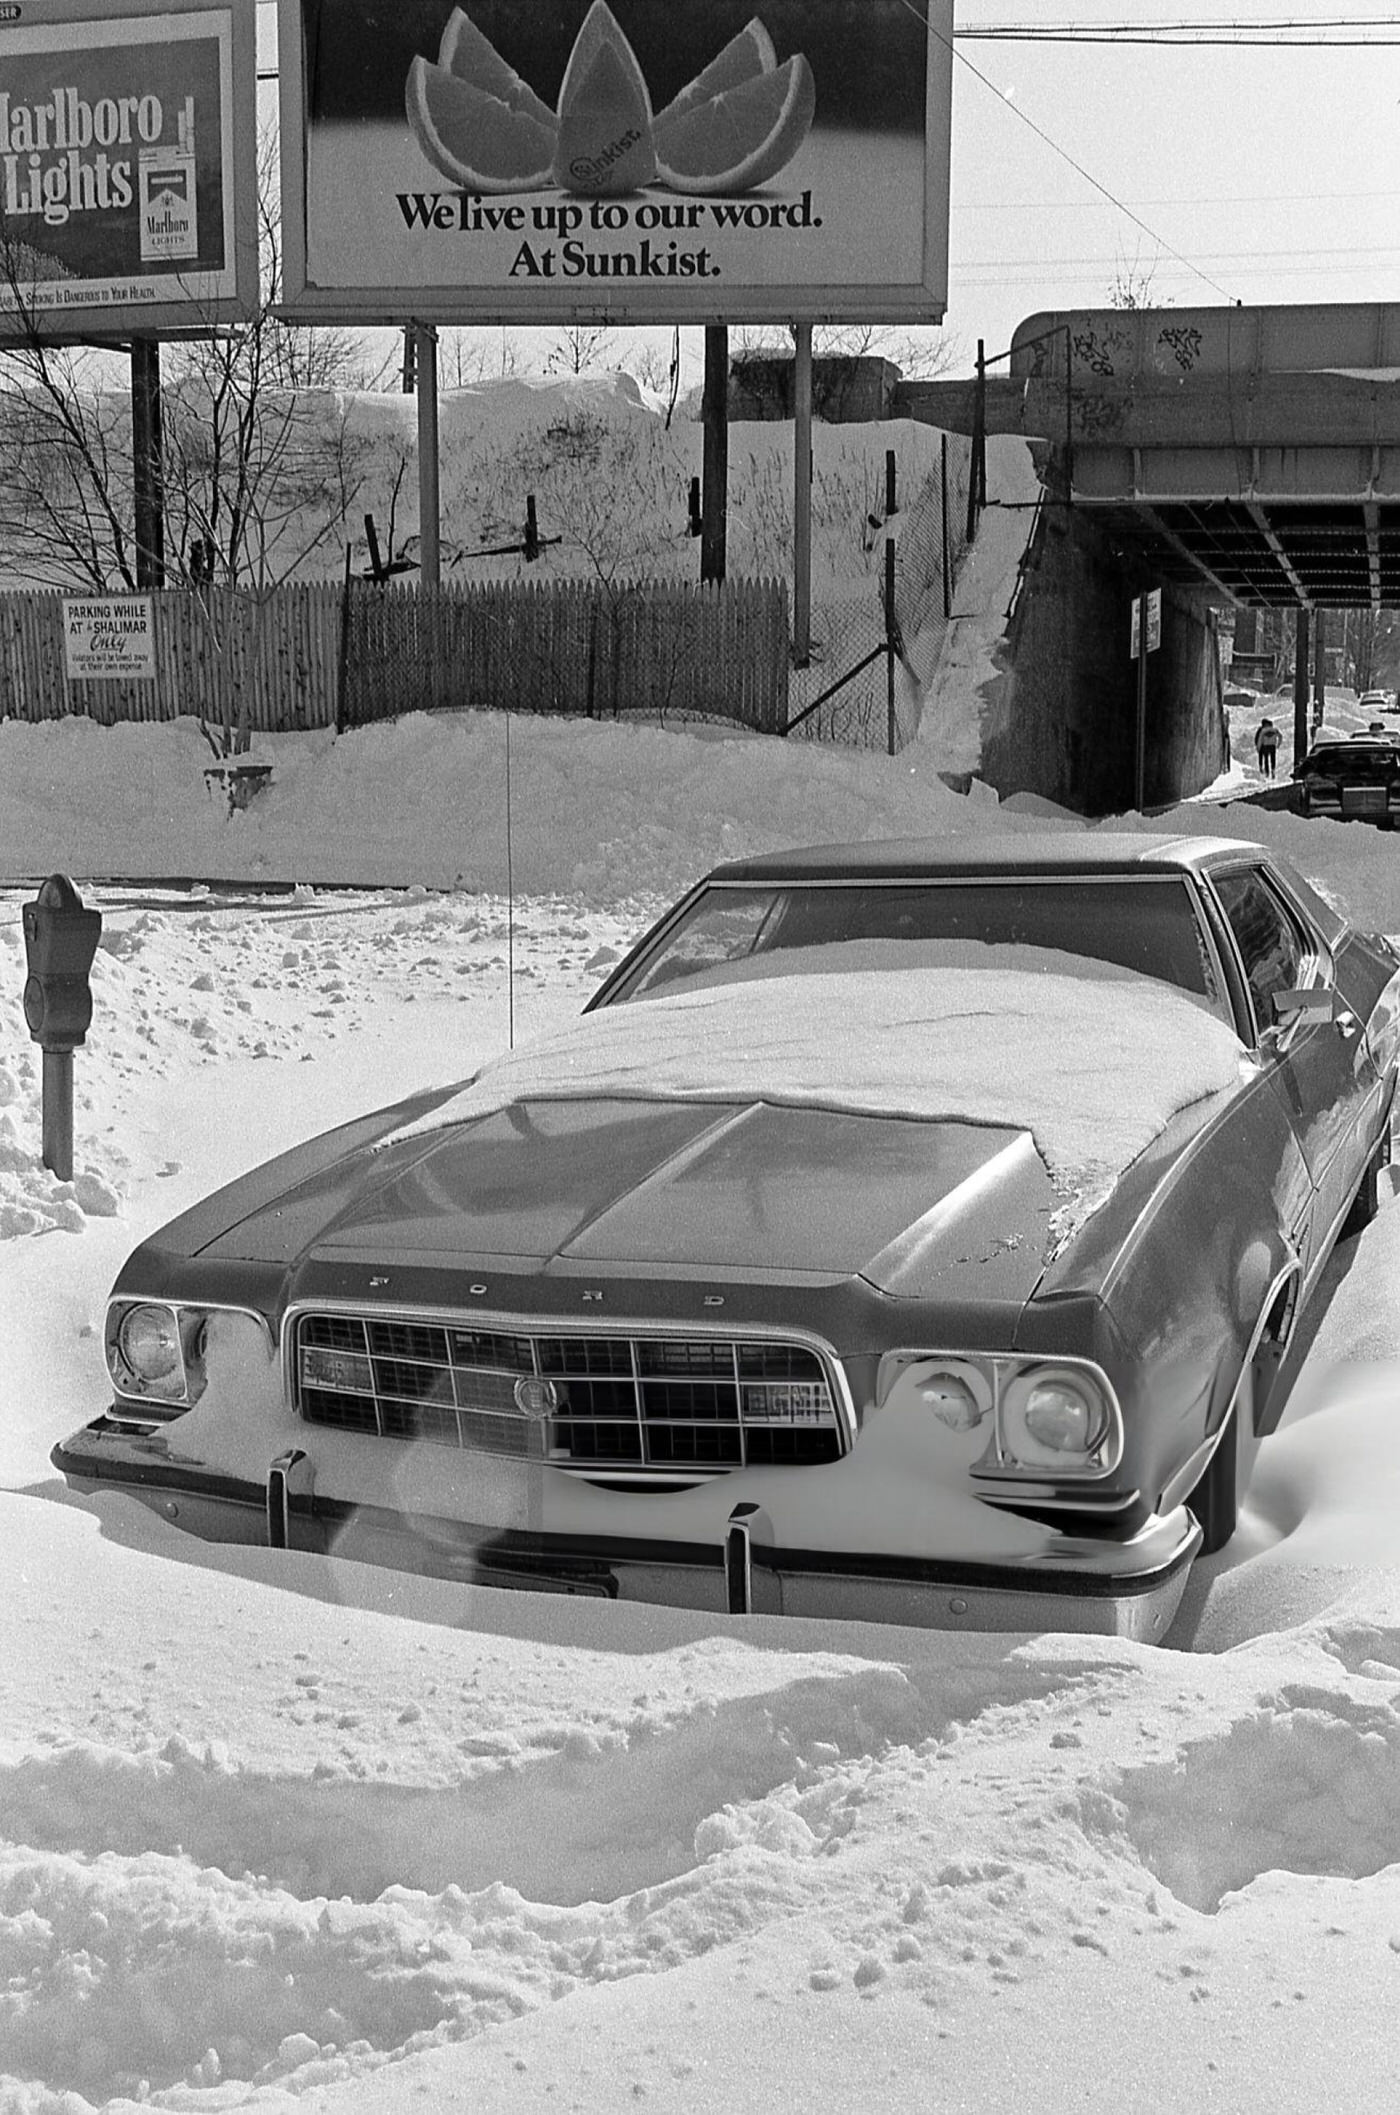 A Car Embedded In Snow On 63Rd Drive In The Aftermath Of A Blizzard In Rego Park, Queens, 1983.